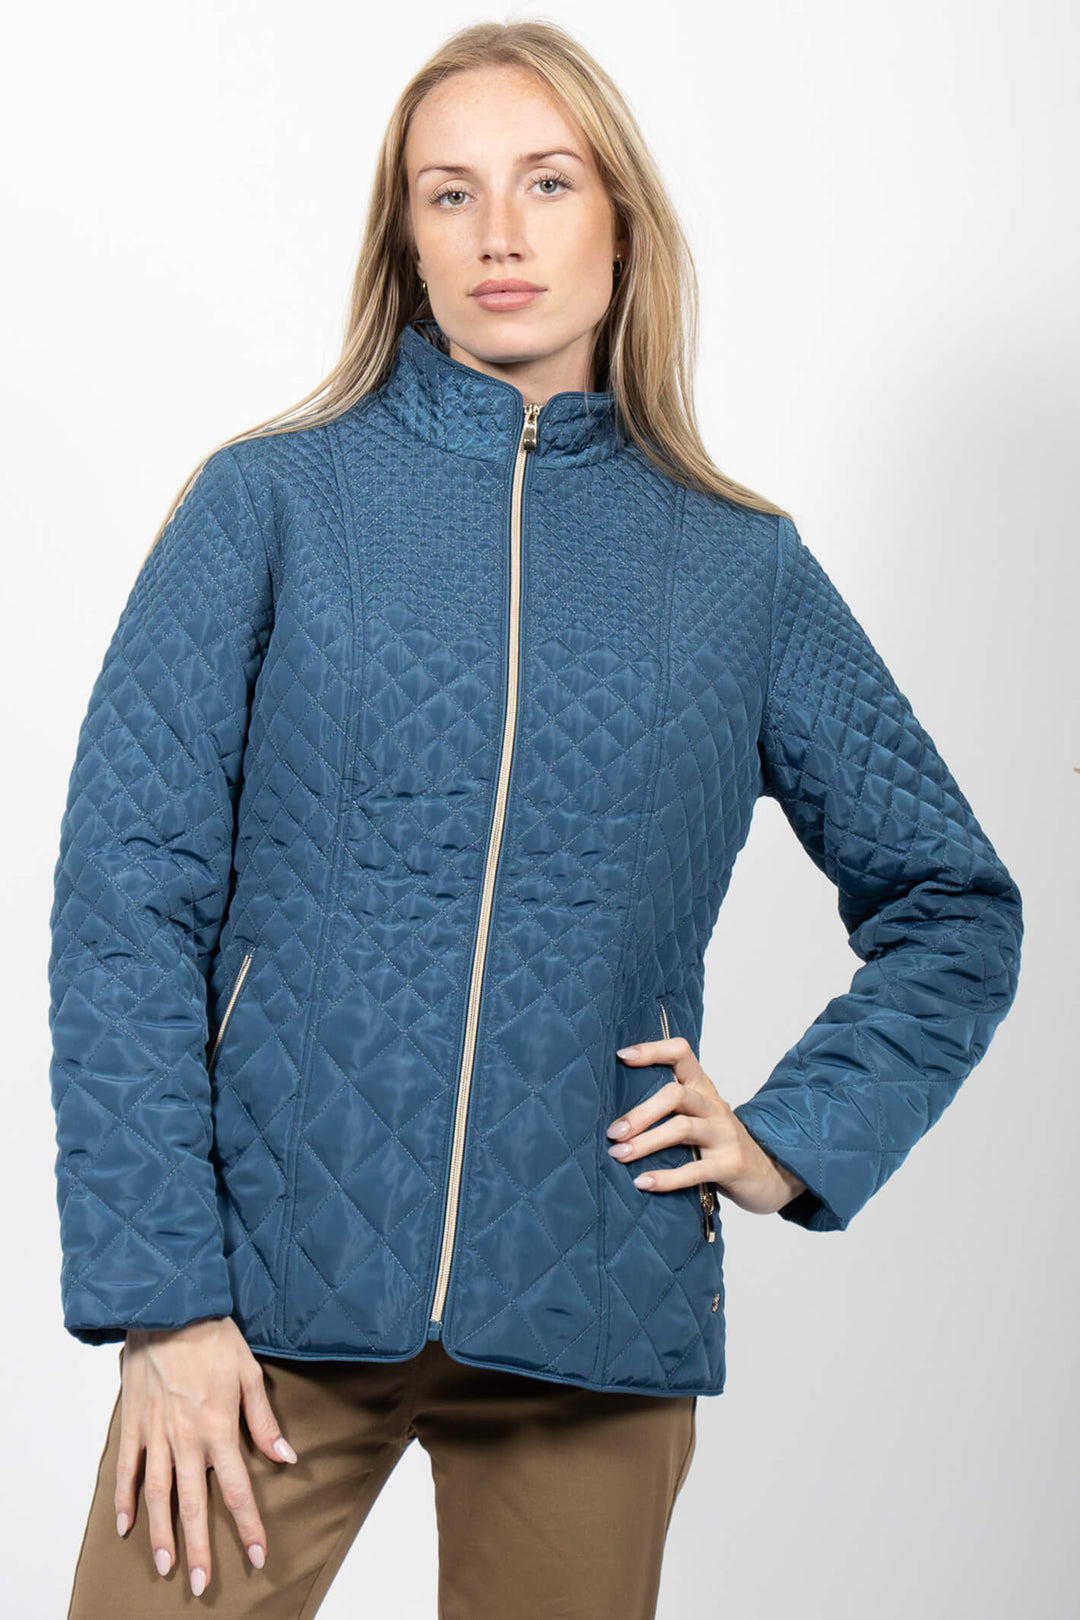 Jessica Graff 26051 Teal Diamond Quilted Short Coat - Experience Boutique